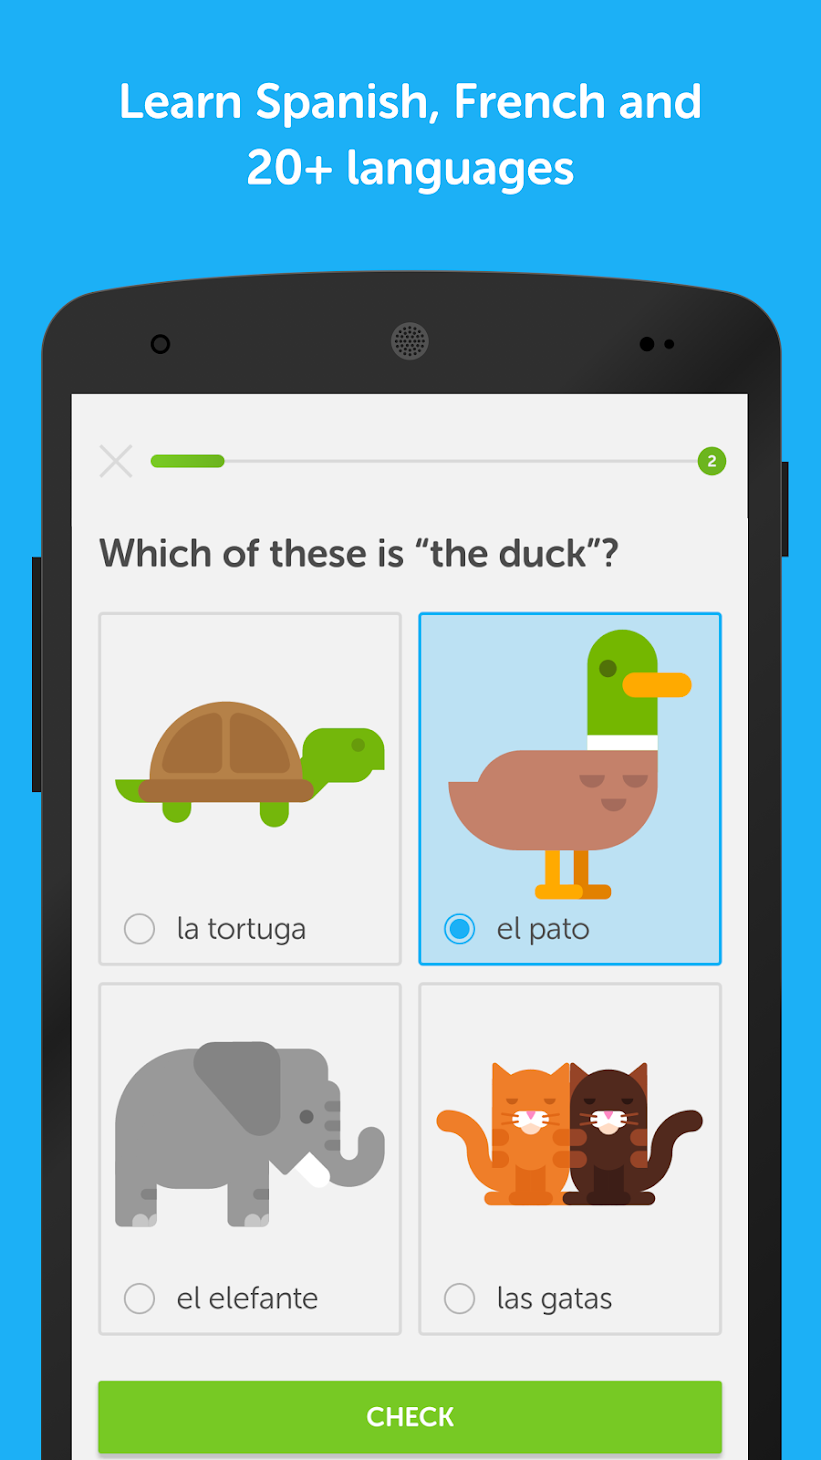 what is the easiest language to learn on duolingo